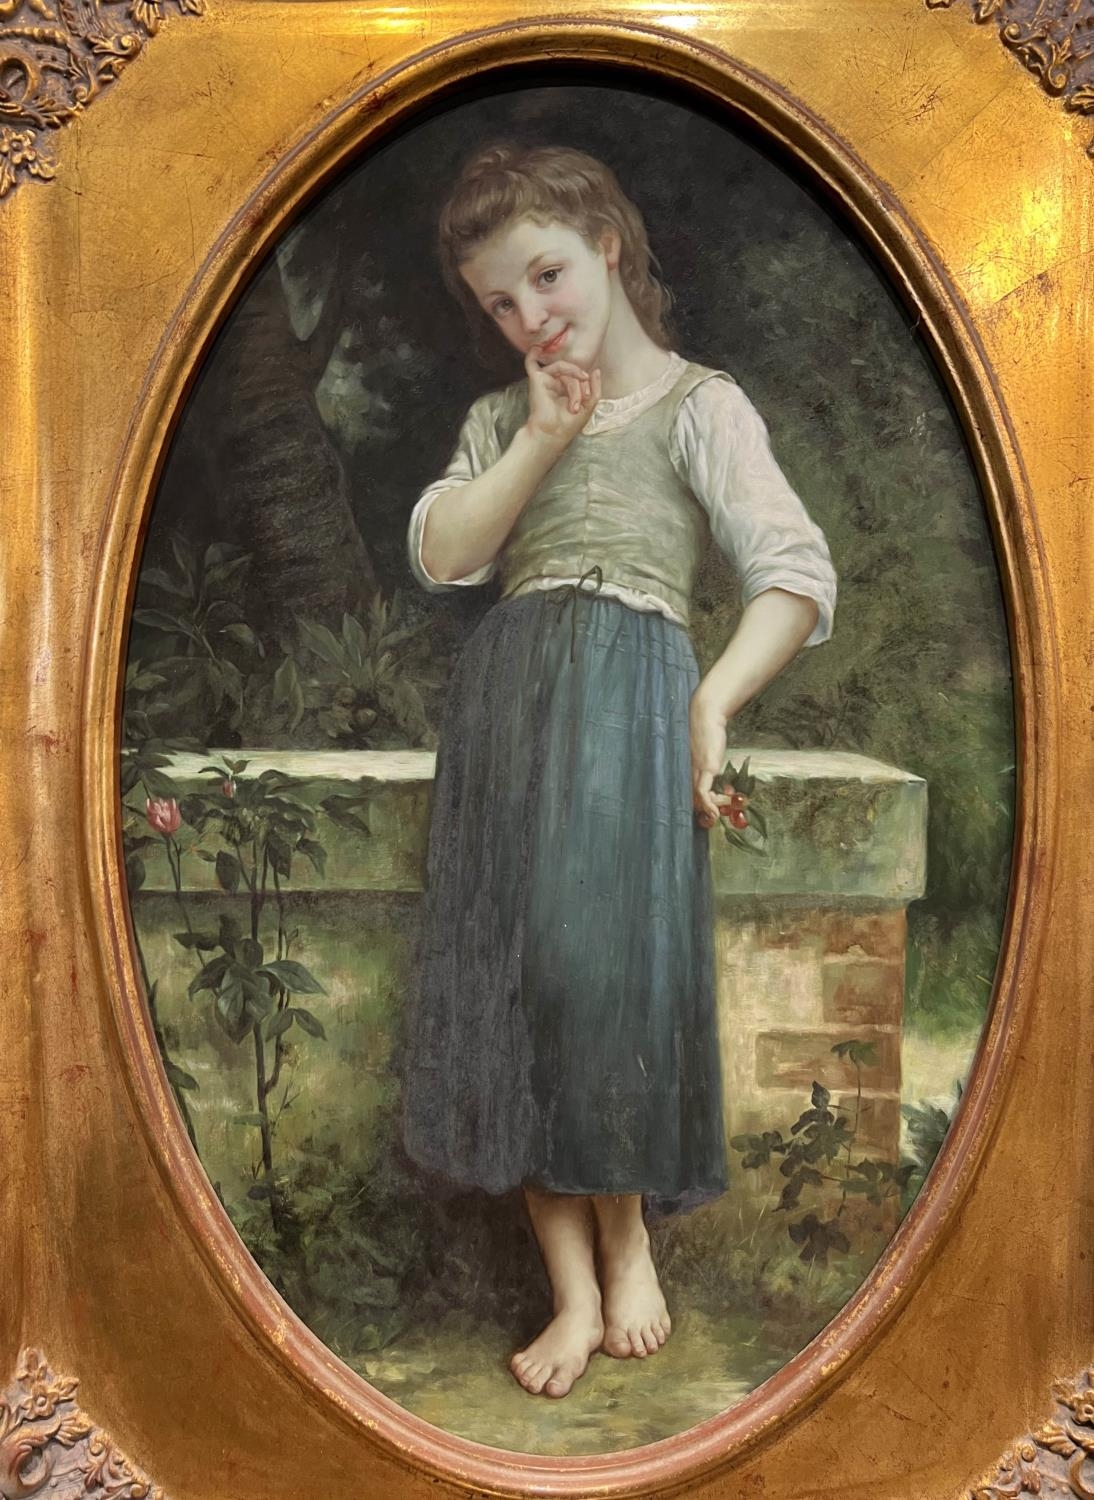 AFTER CHARLES-AMABLE LENOIR (1860-1926) 'The Cherry Picker', oil on canvas, 86cm x 55cm, gilt - Image 4 of 4